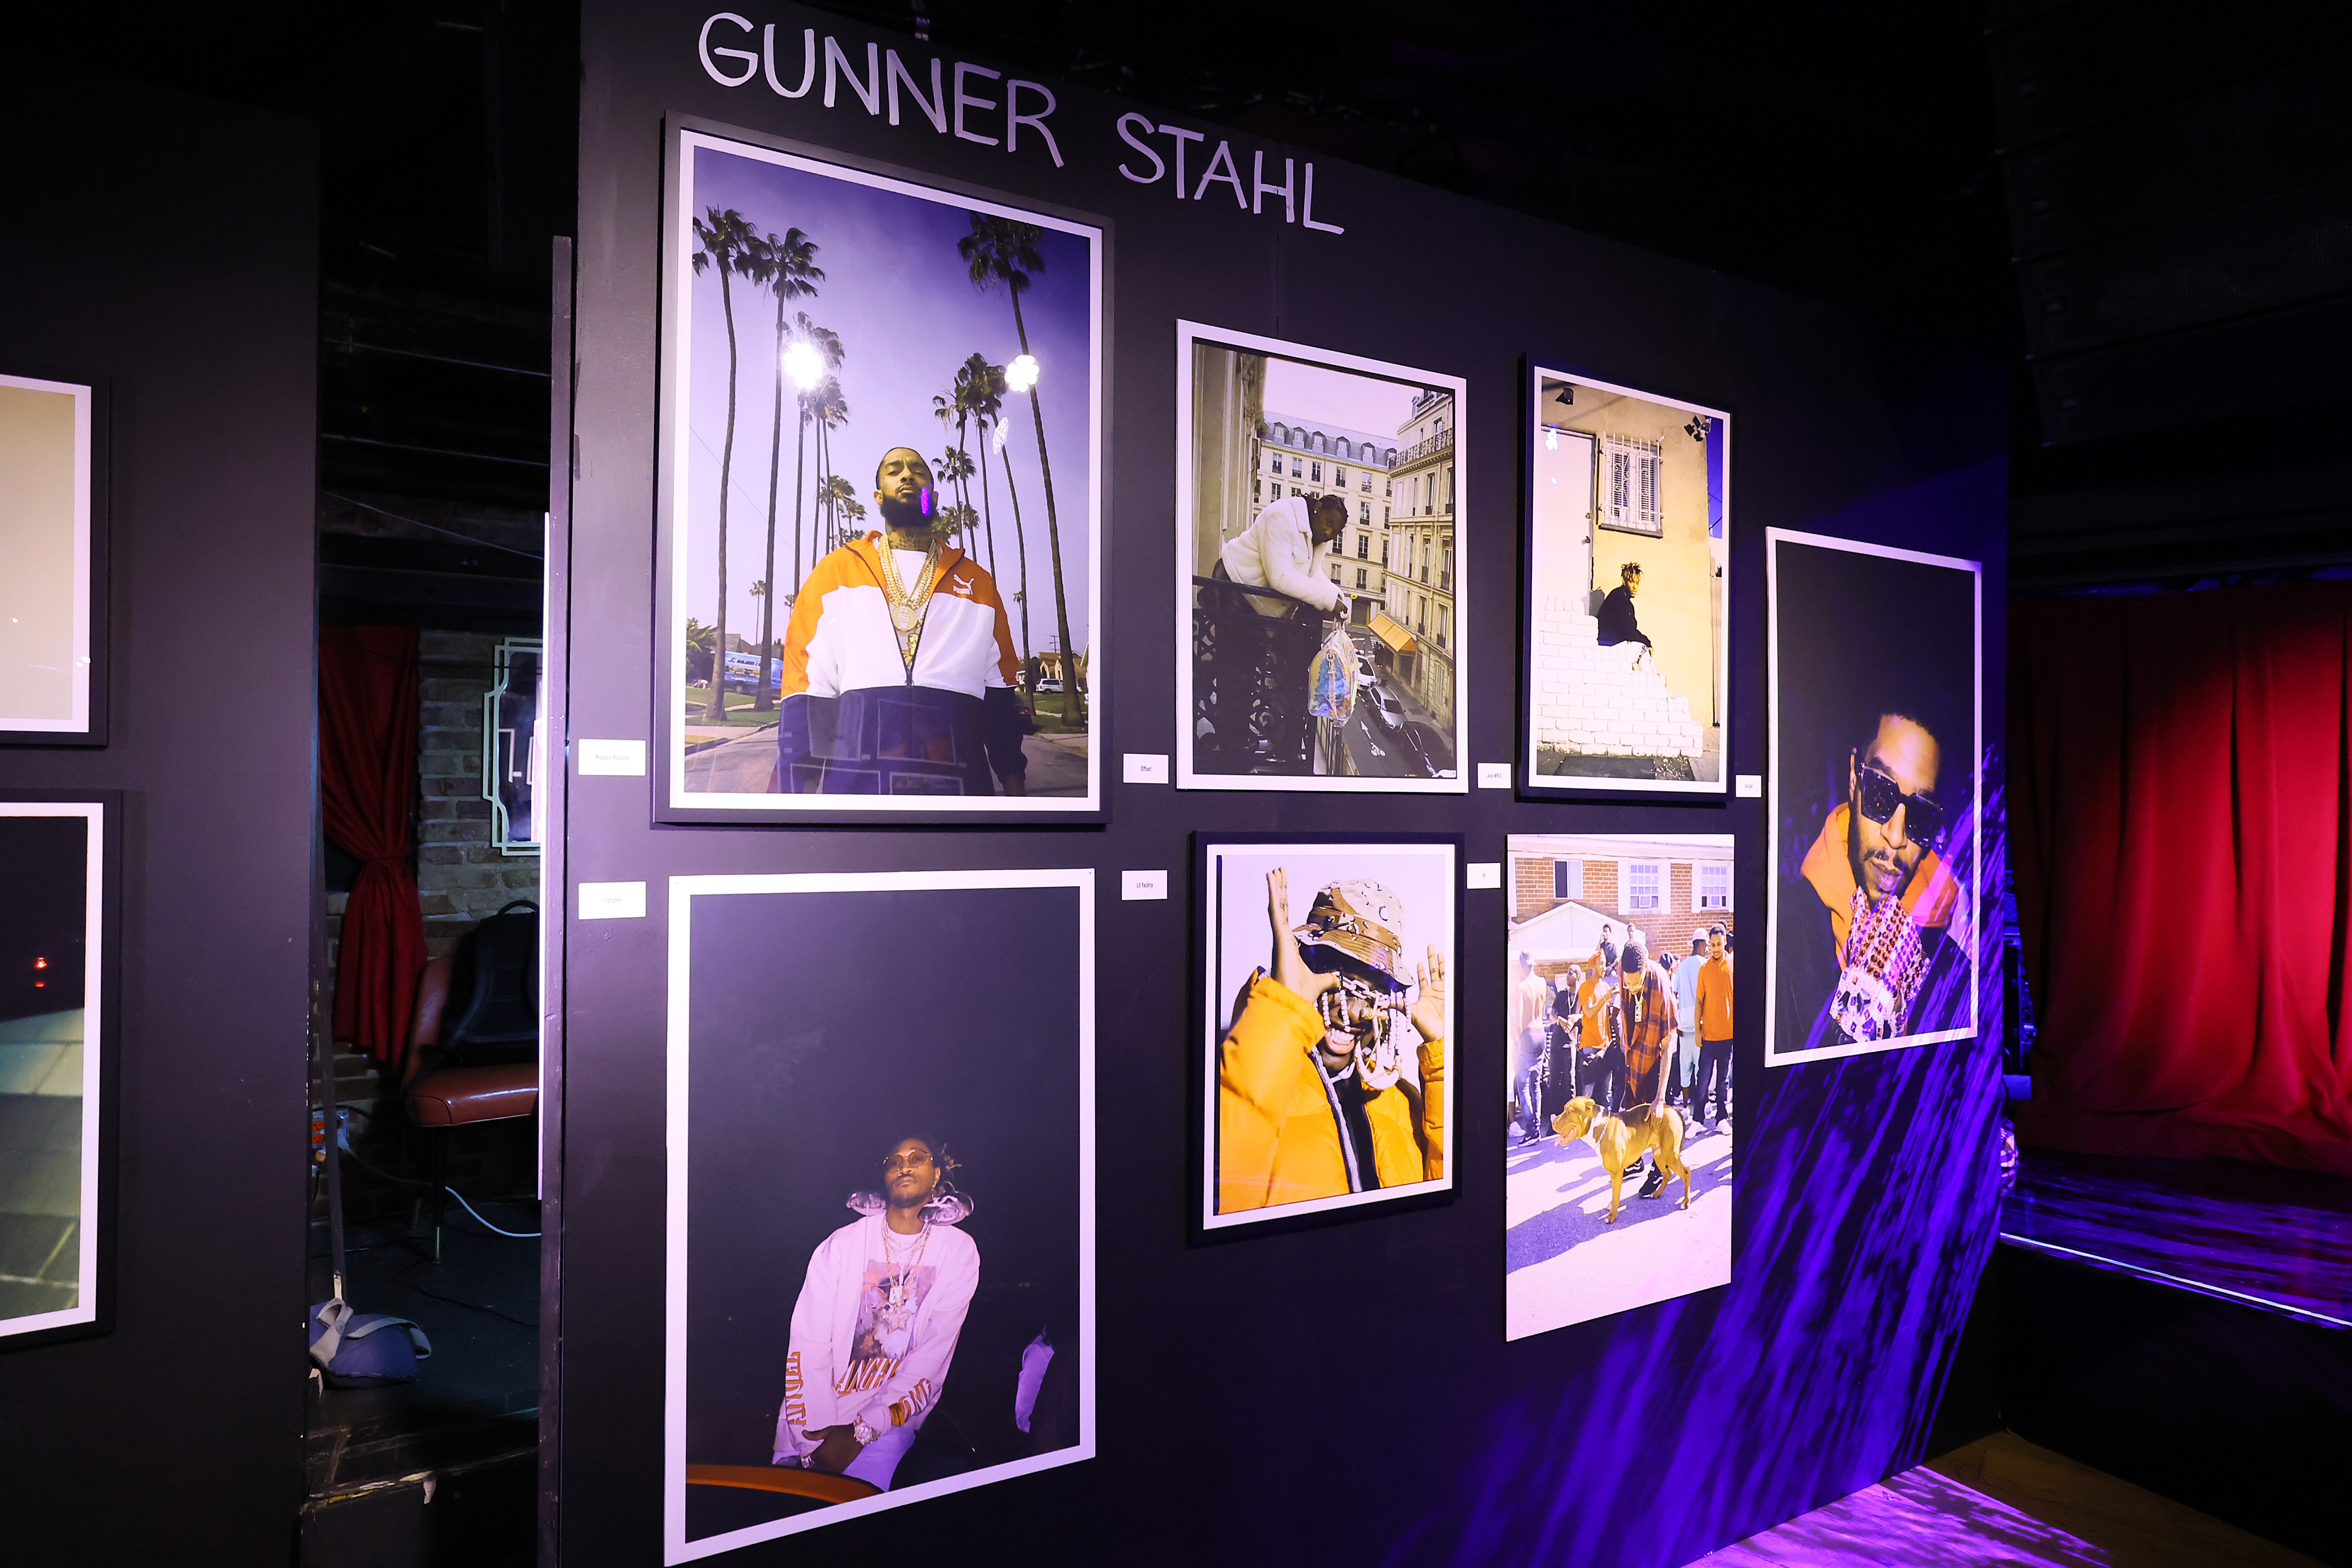 Gunner Stahl photo wall at the NextGen party. Image via Getty